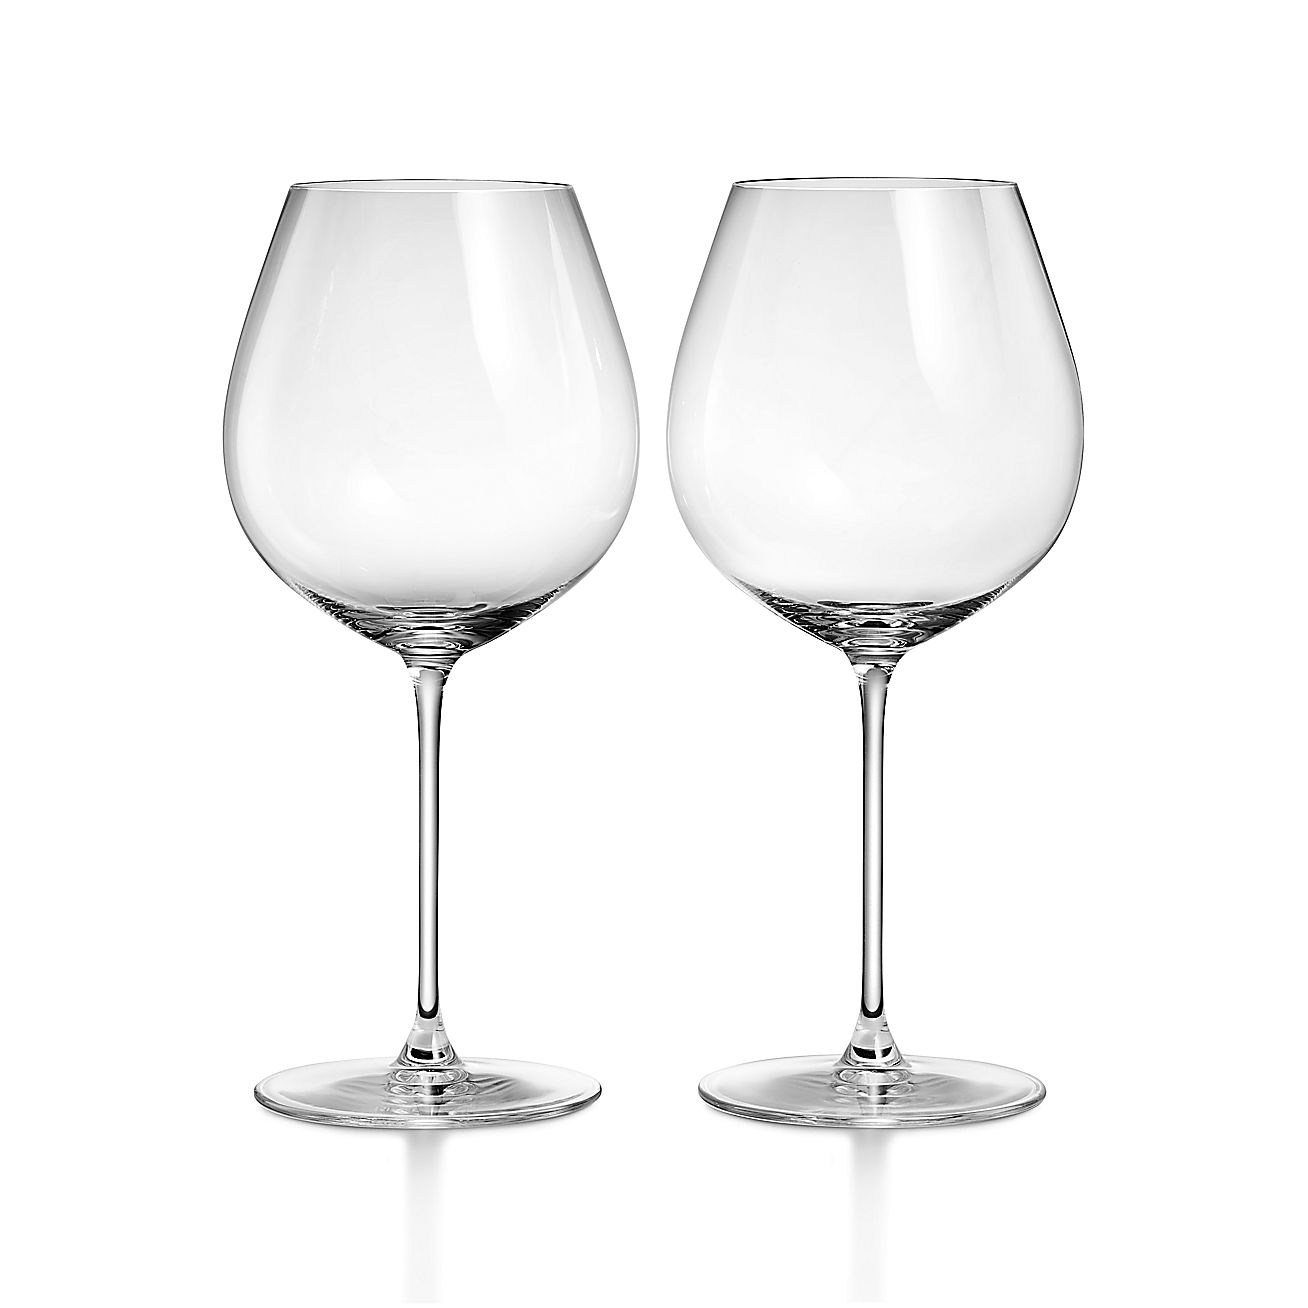 Tiffany Home Essentials Pinot Noir Glasses in Crystal Glass, Set of Two